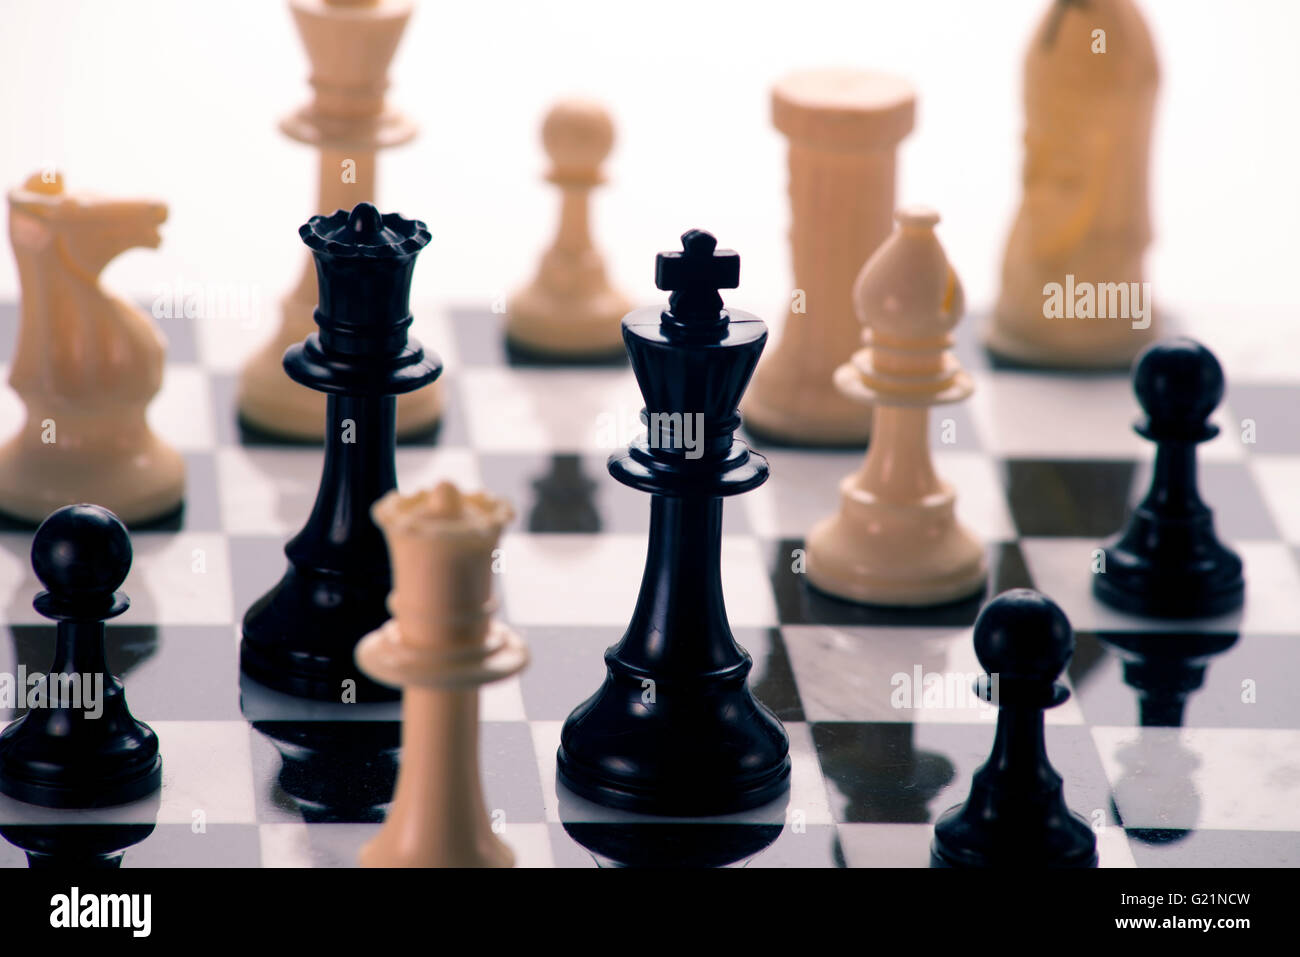 Compass Chess Piece On Chess Board Stock Photo 2296557763